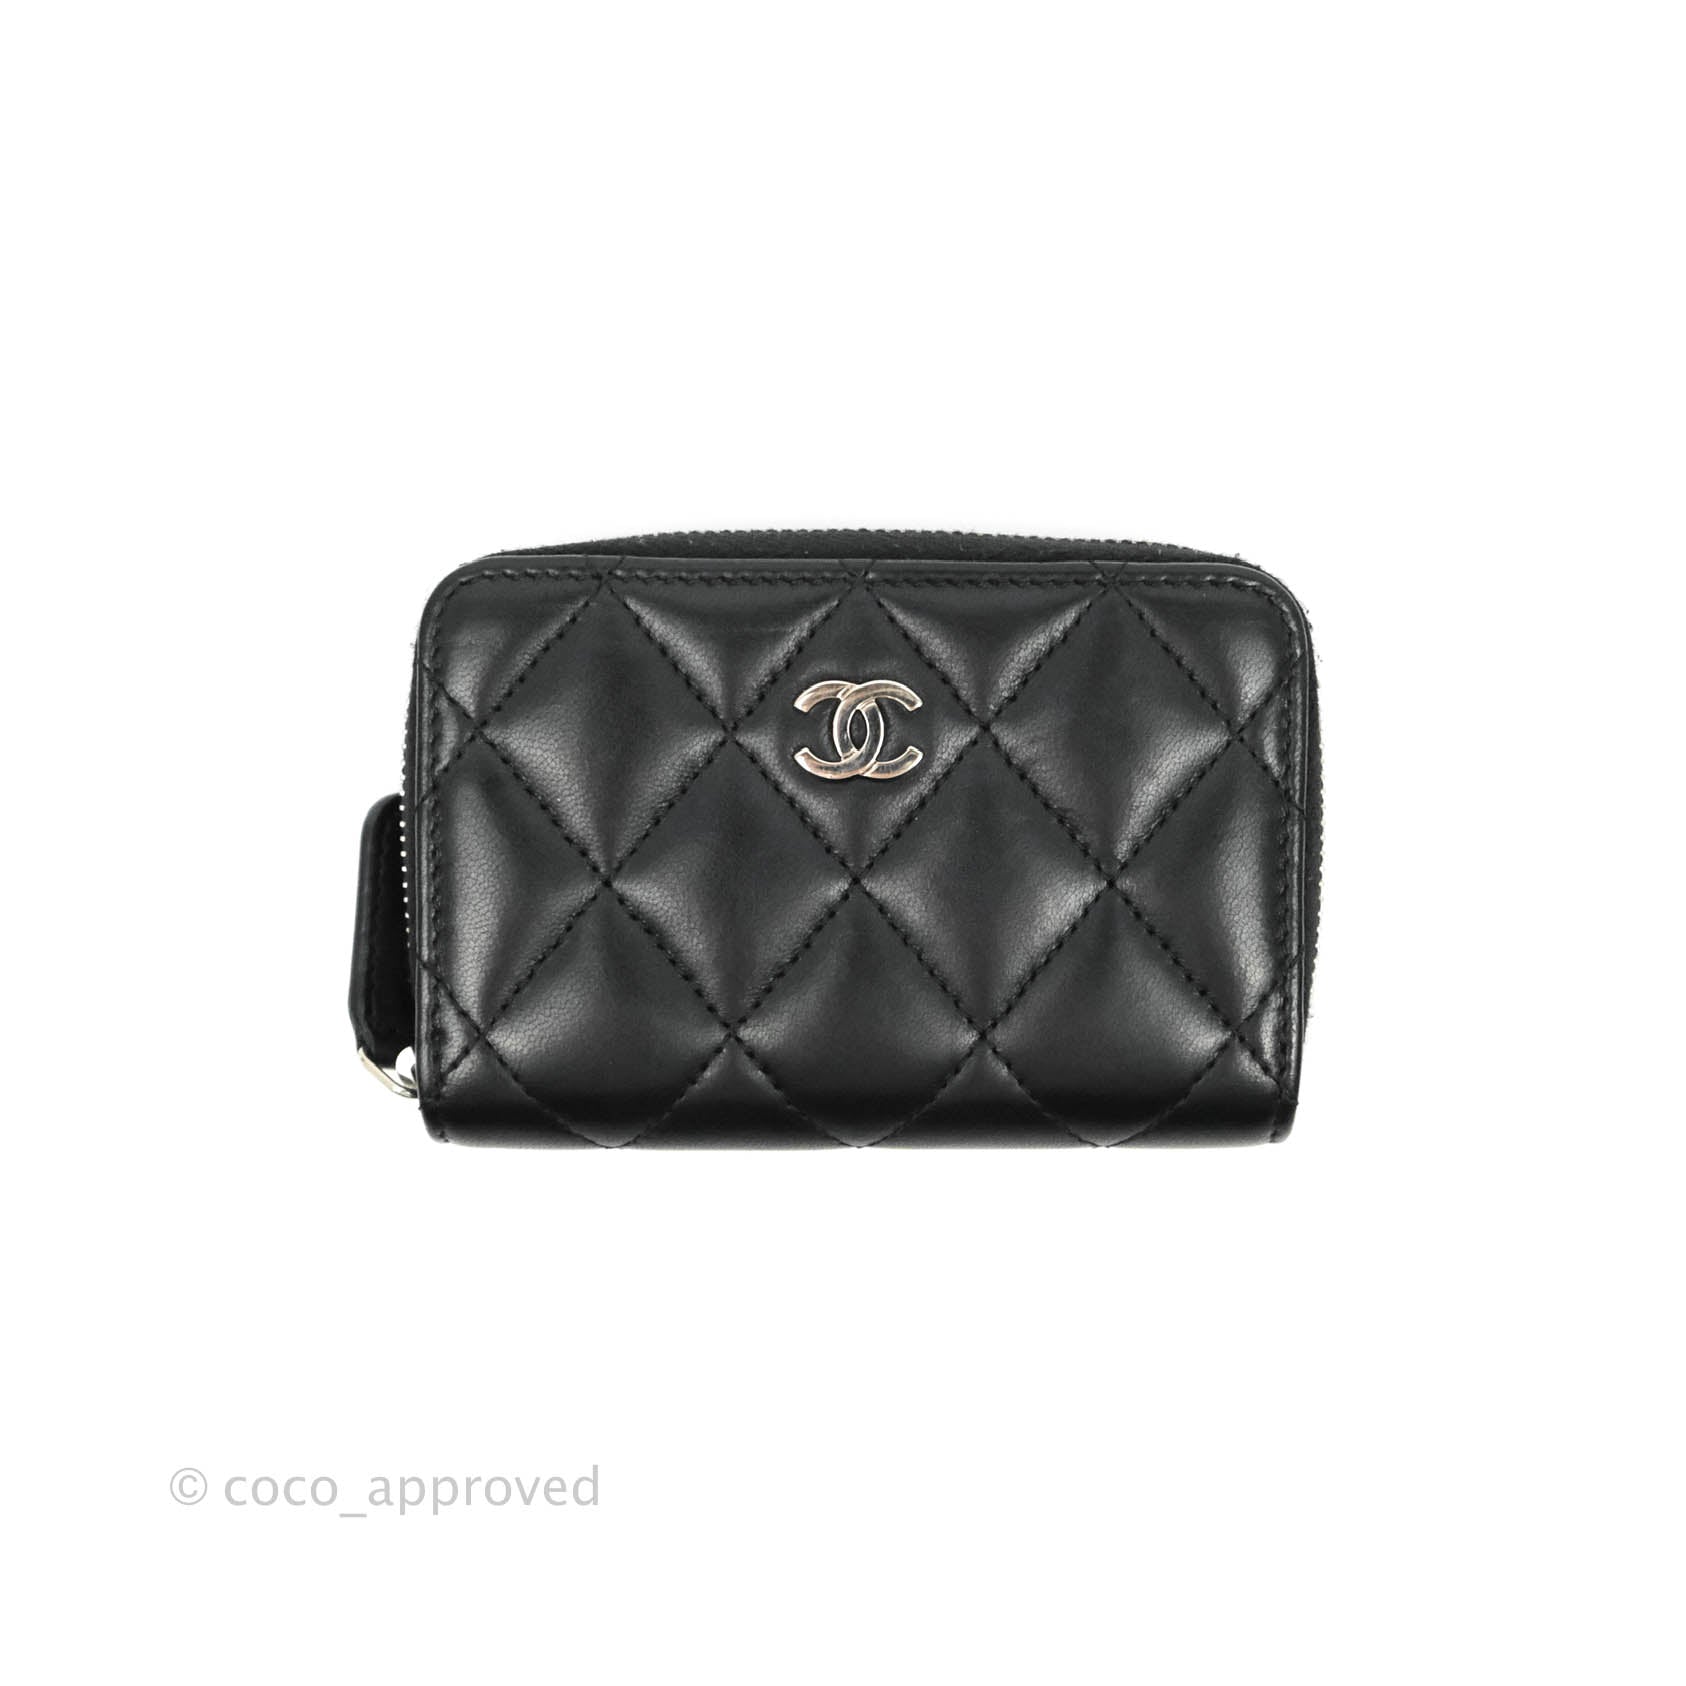 black chanel bag with gold chain necklace